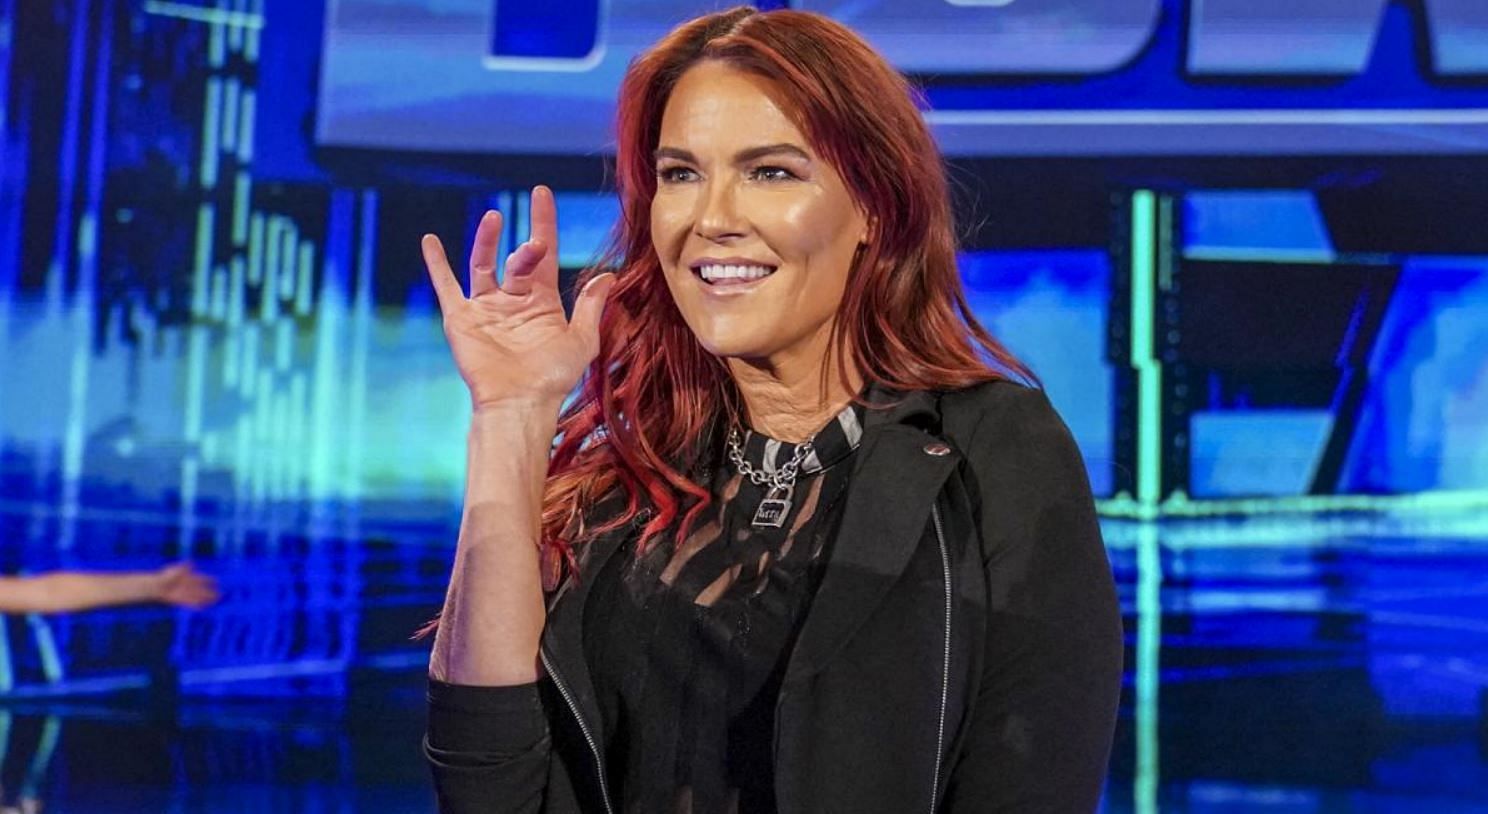 Lita will collide with Becky Lynch at Elimination Chamber